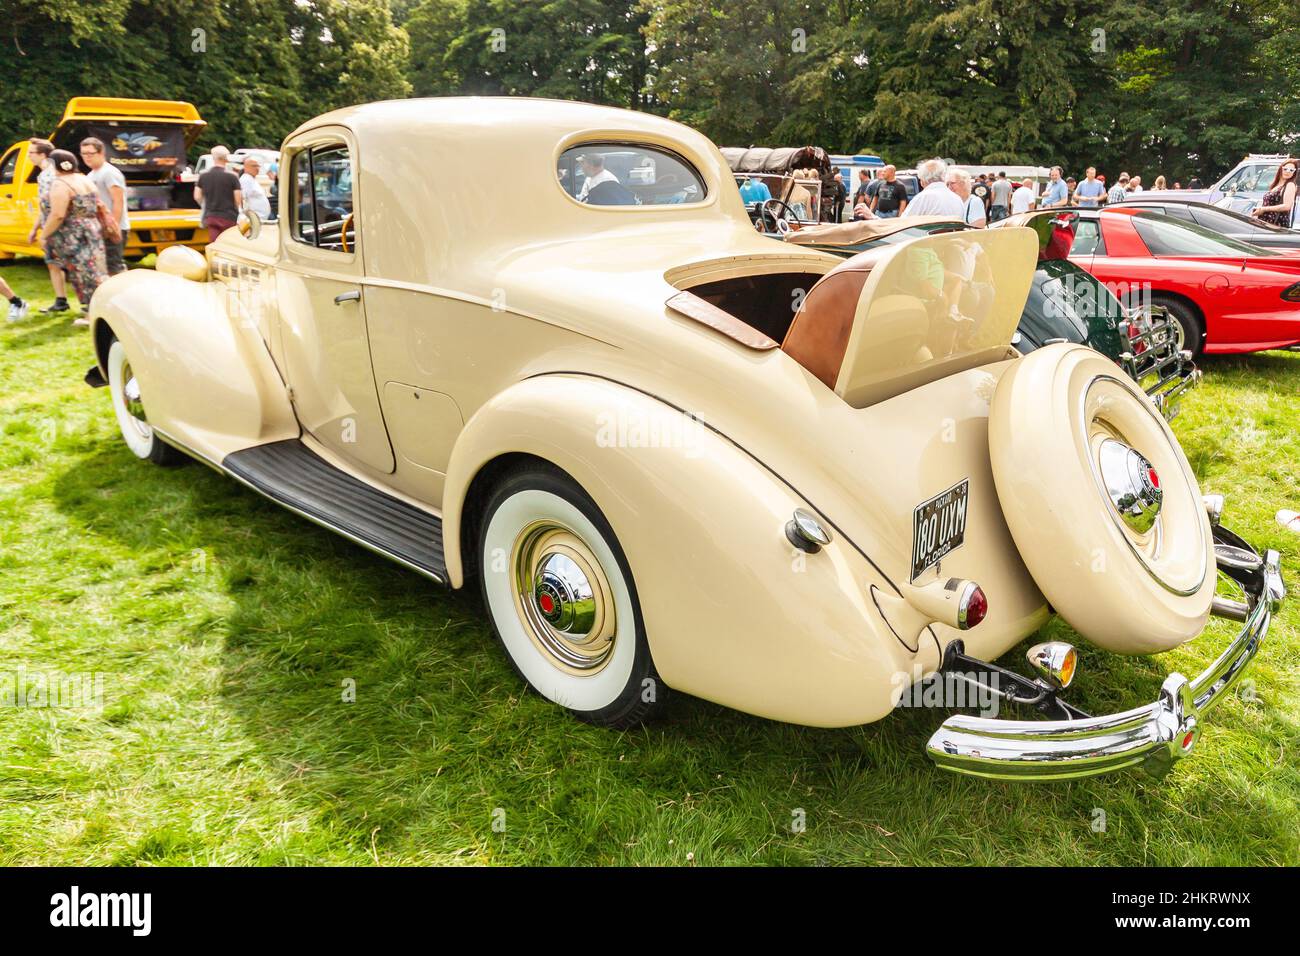 vintage 1938 cream Packard super eight coupe with rumble or dickey seat at American classic car show Stock Photo